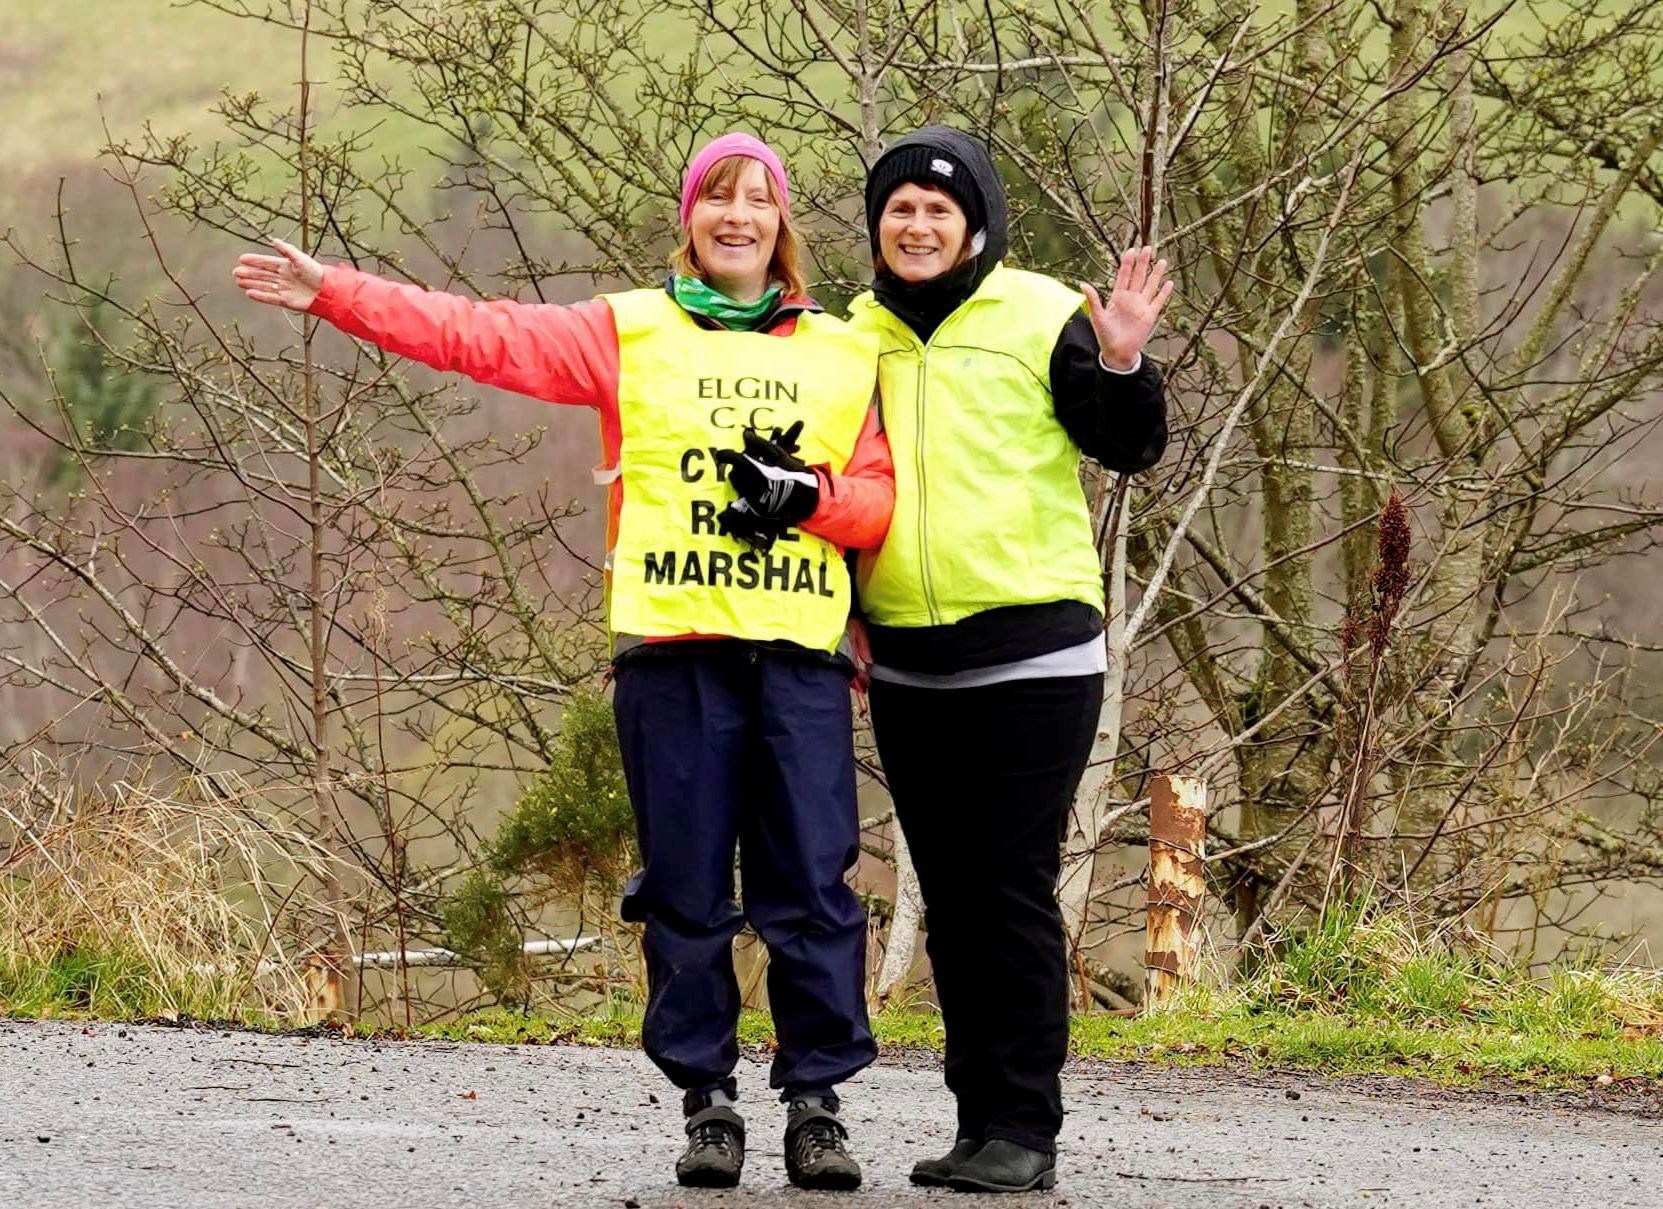 The event couldn't go ahead without the stalwart marshals. Photo by Ritchie Craib